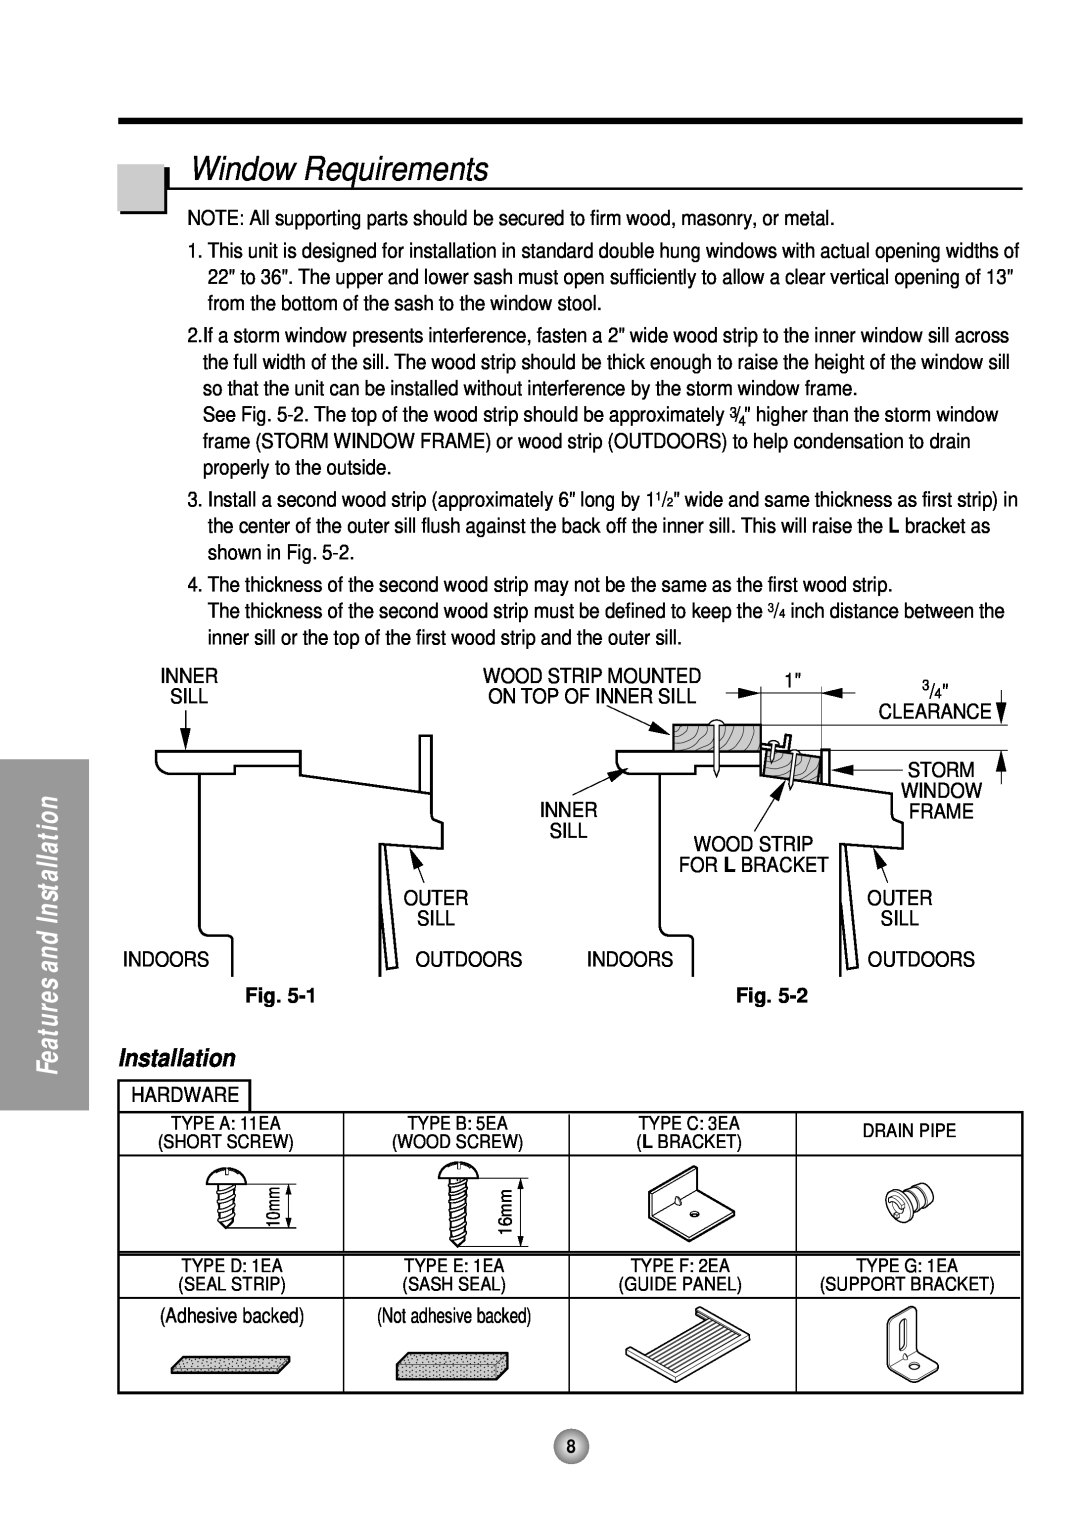 Panasonic HQ-2051TH manual Window Requirements, Features and Installation 